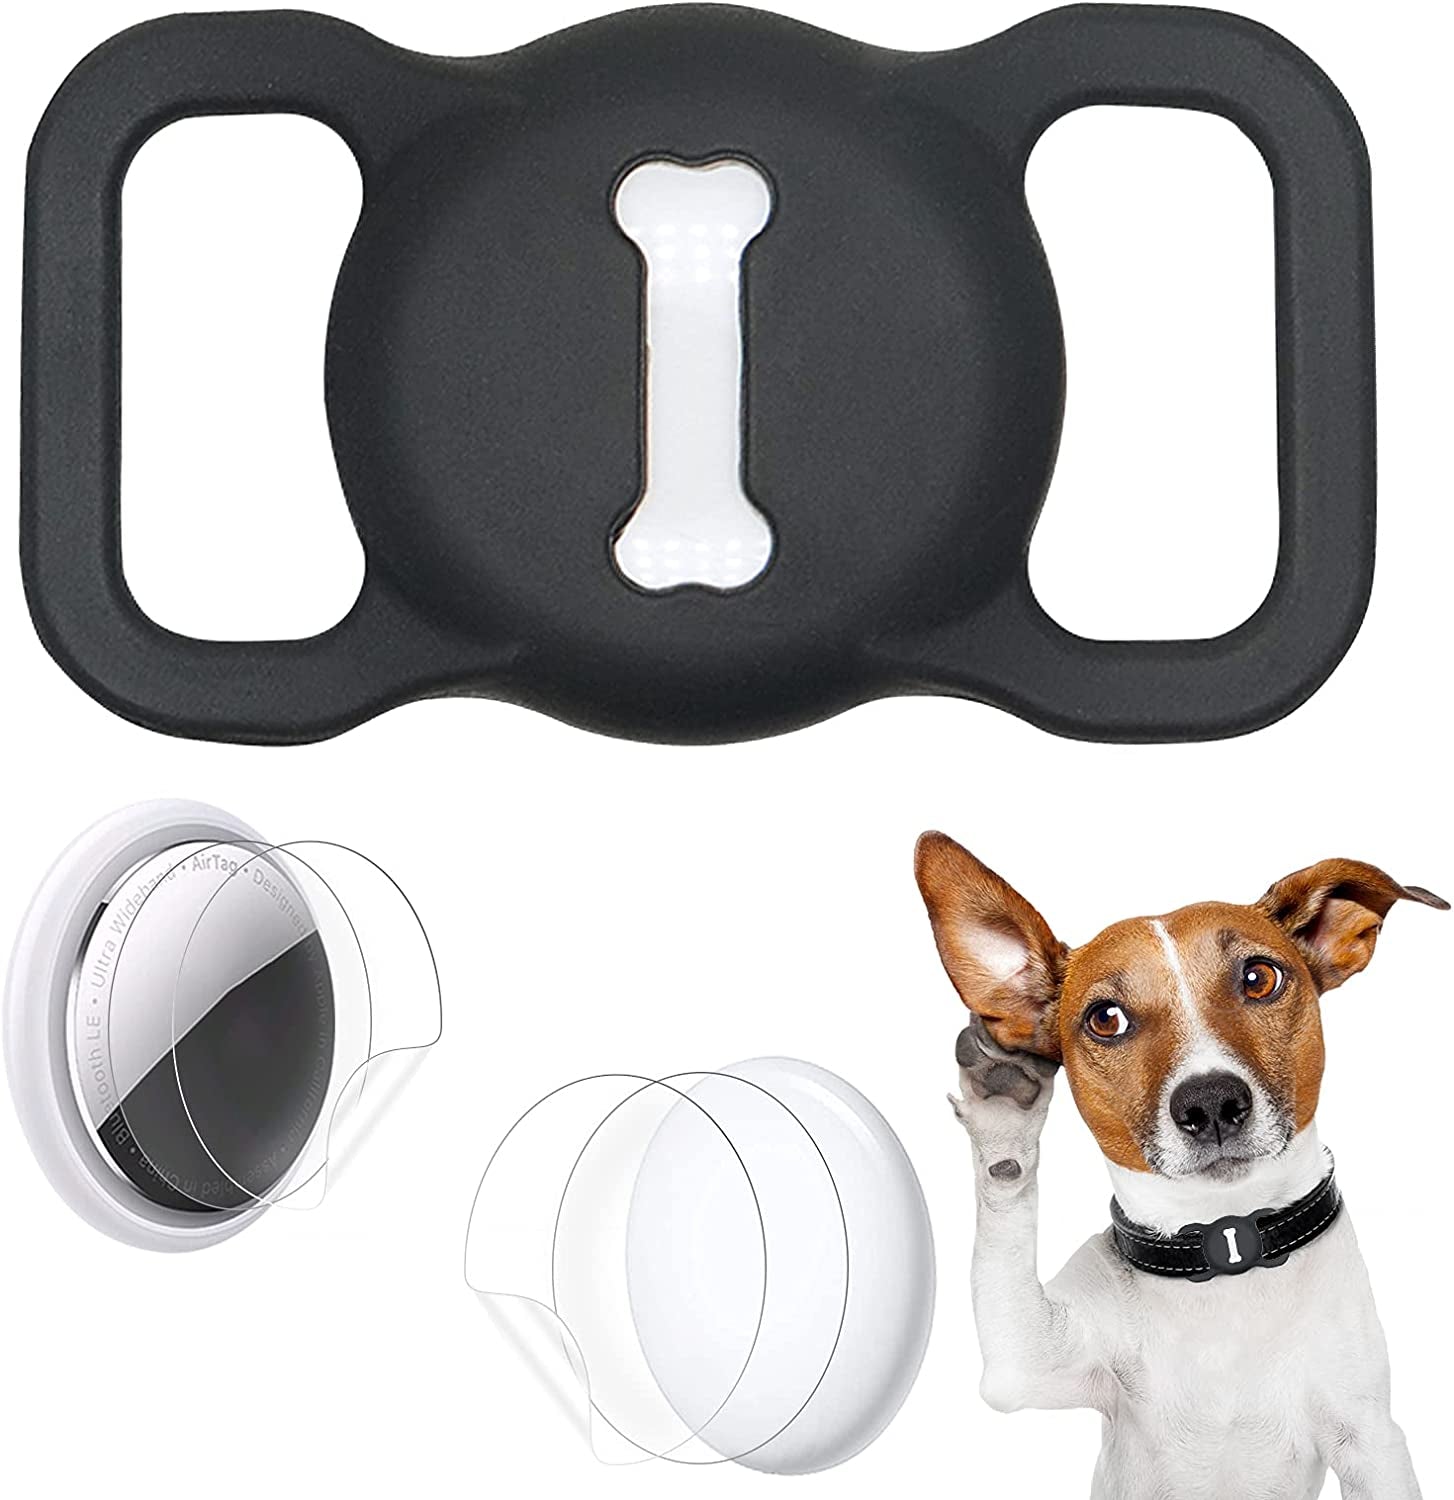 Protective Case Compatible for Apple Airtags for Dog Cat Collar Pet Loop Holder, Airtag Holder Accessories with Screen Protectors, Air Tag Silicone Cover for Pet Collar Electronics > GPS Accessories > GPS Cases Wustentre Black  